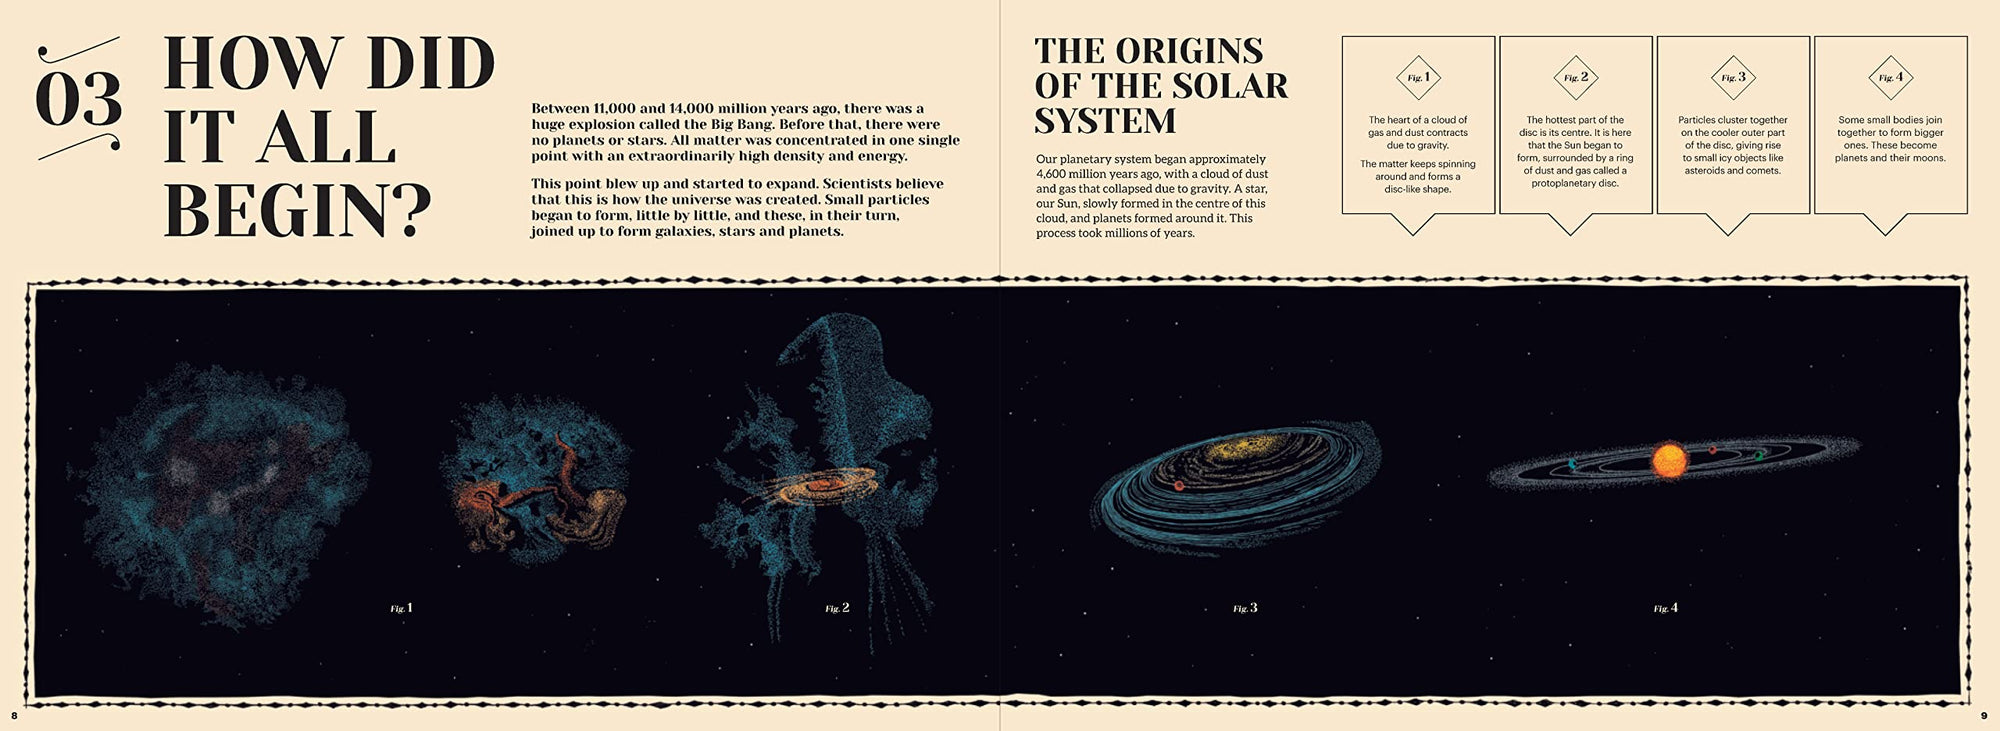 How Our Solar System Began